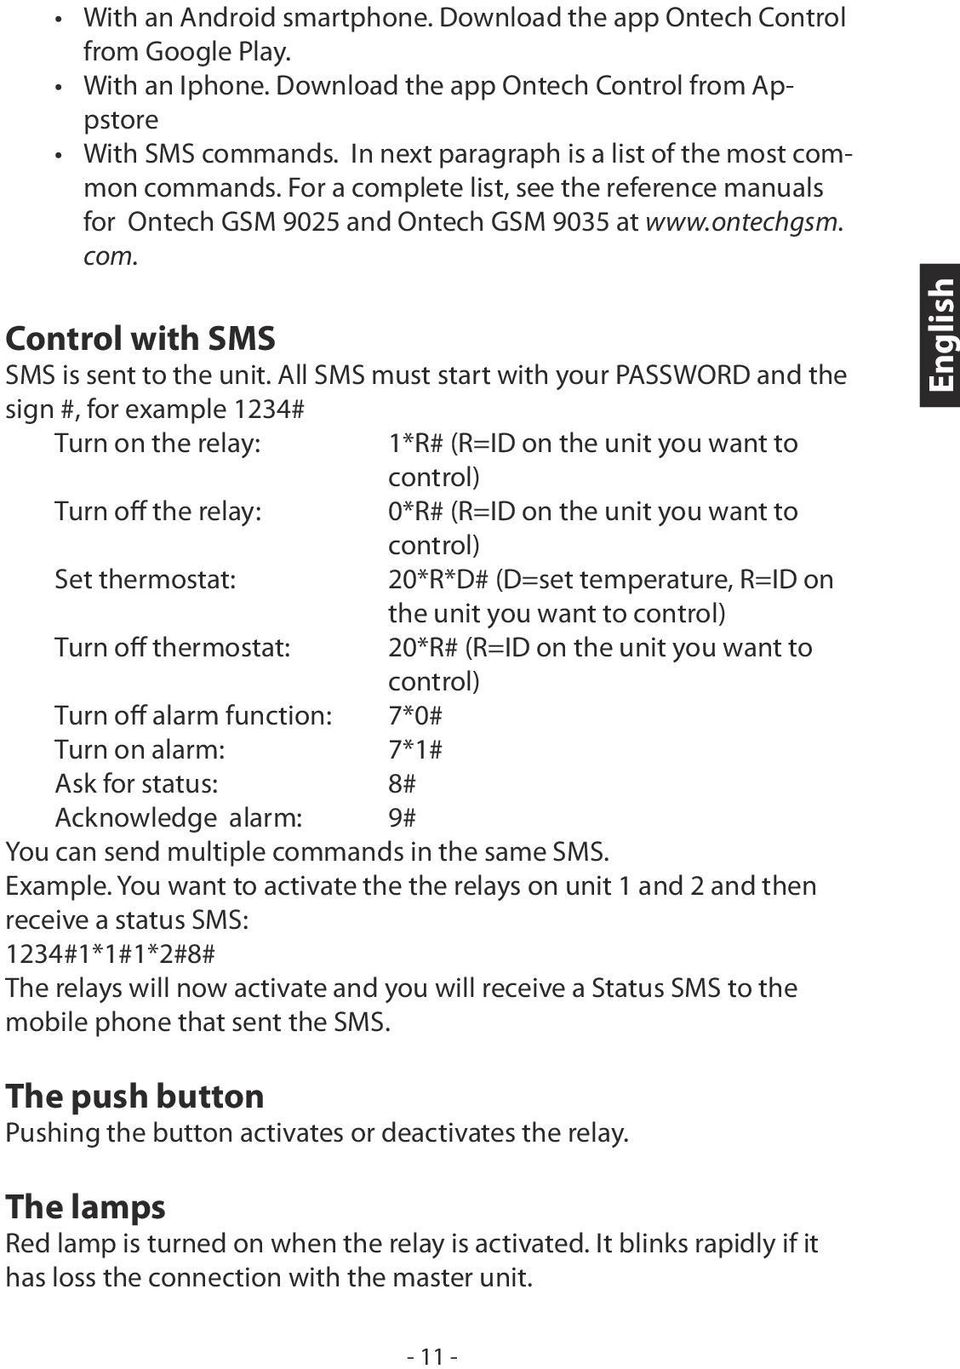 All SMS must start with your PASSWORD and the sign #, for example 1234# Turn on the relay: 1*R# (R=ID on the unit you want to control) Turn off the relay: 0*R# (R=ID on the unit you want to control)